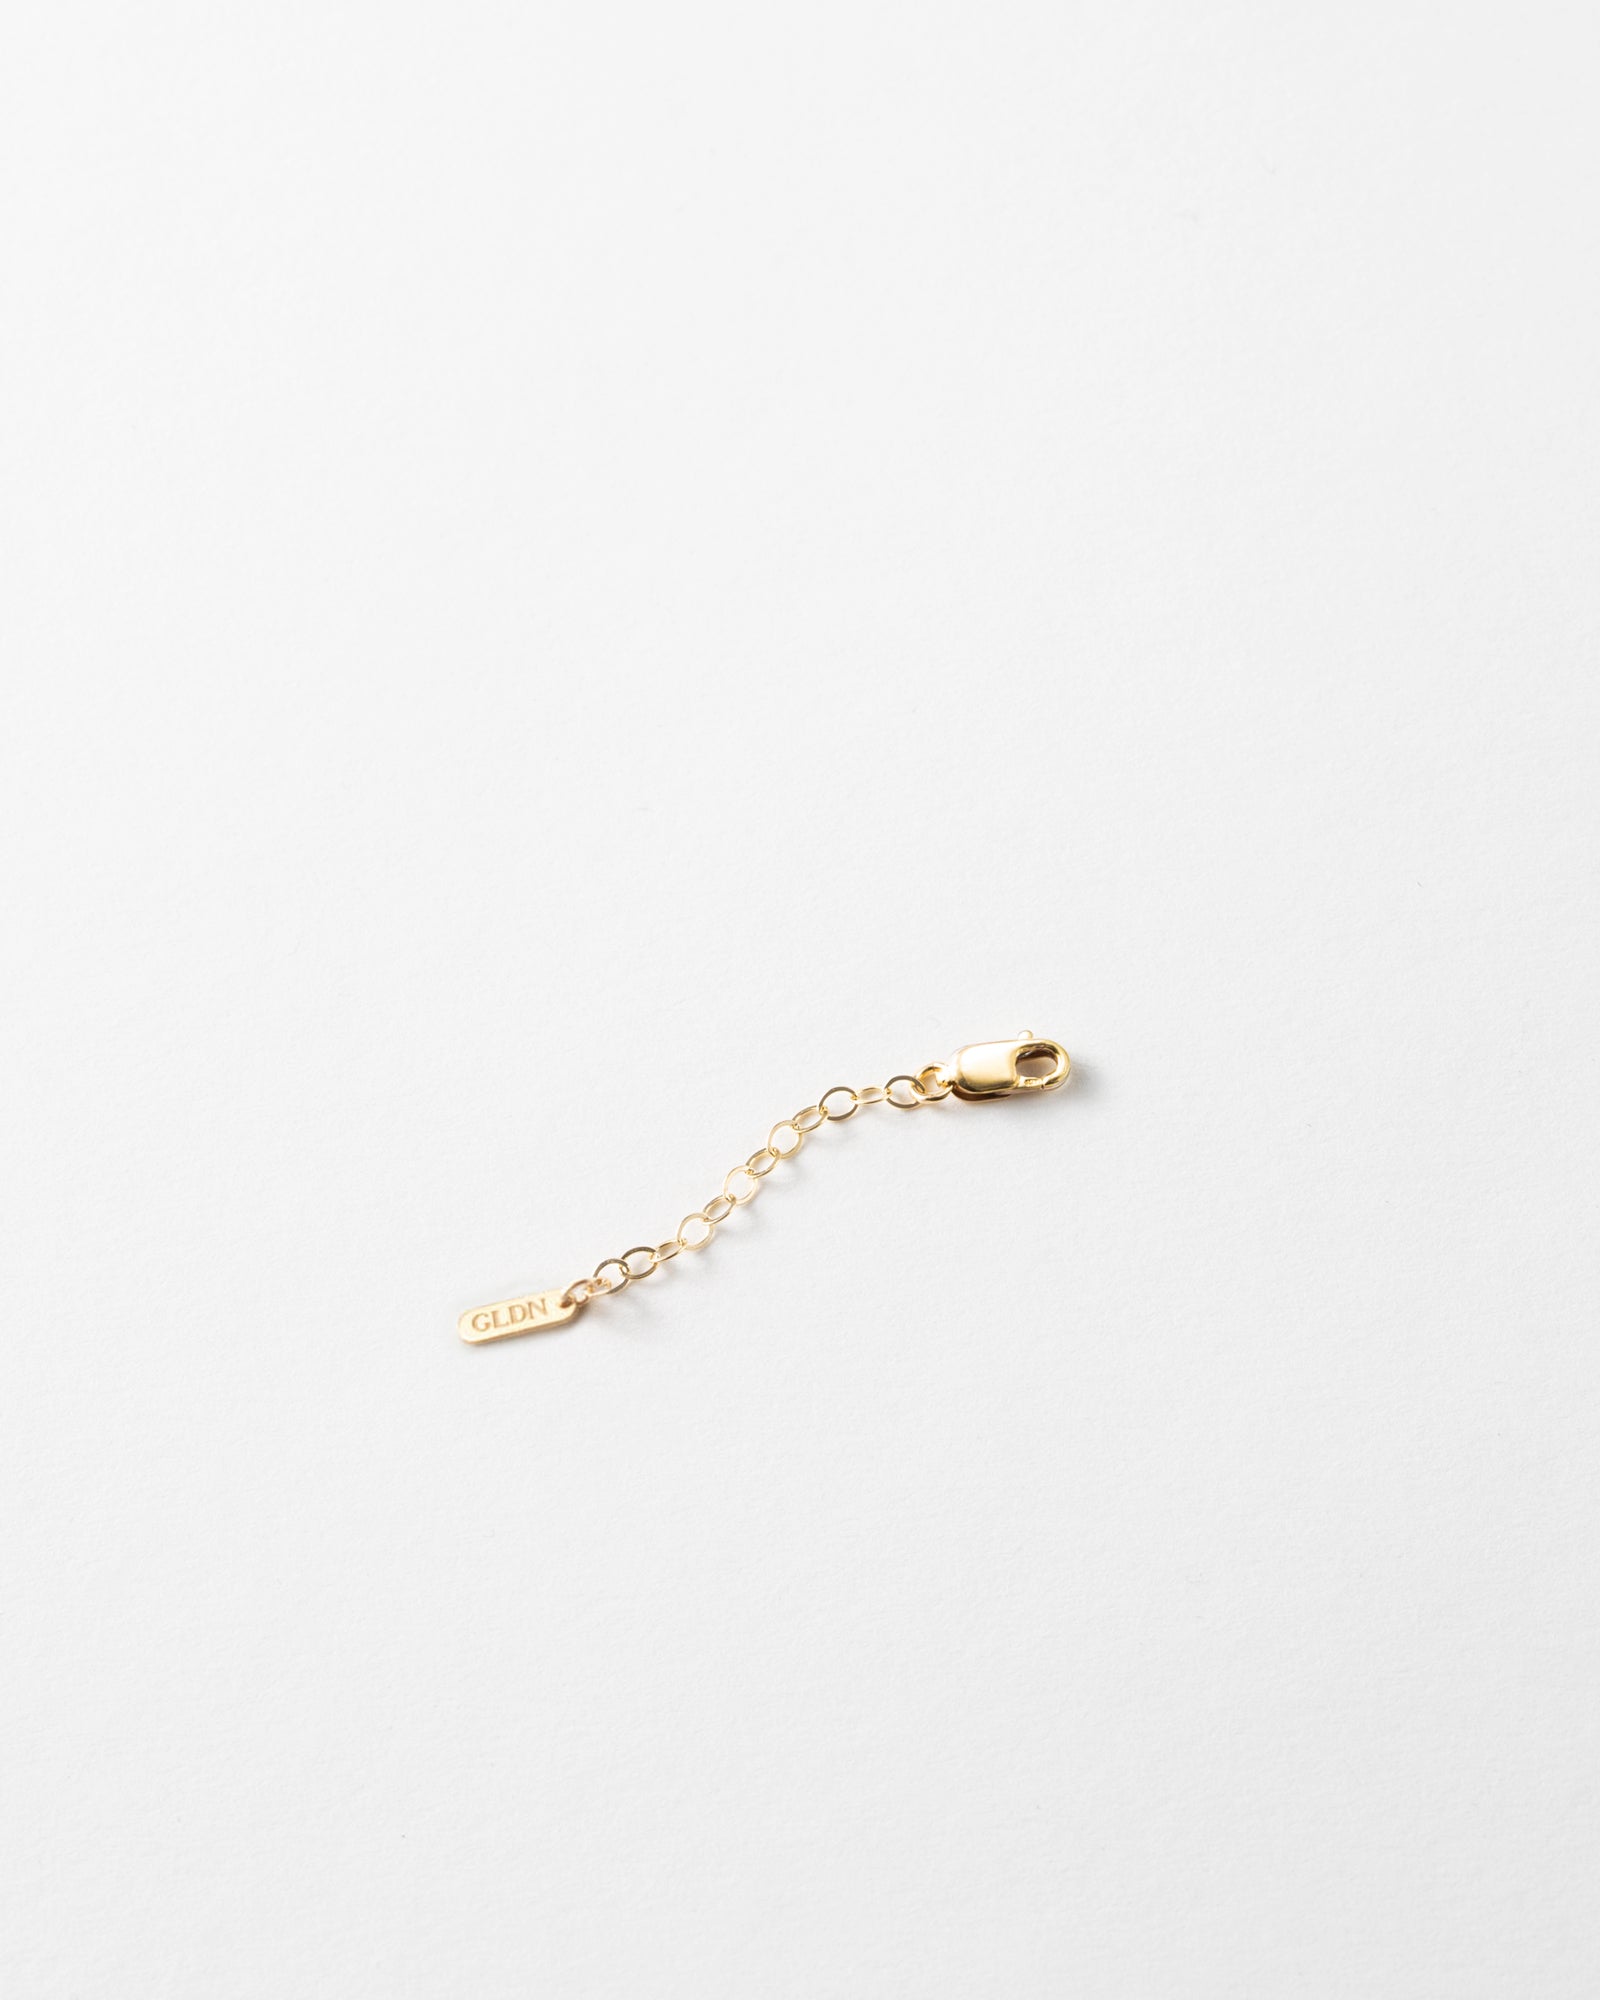 Necklace Extender, Meaningful Jewellery